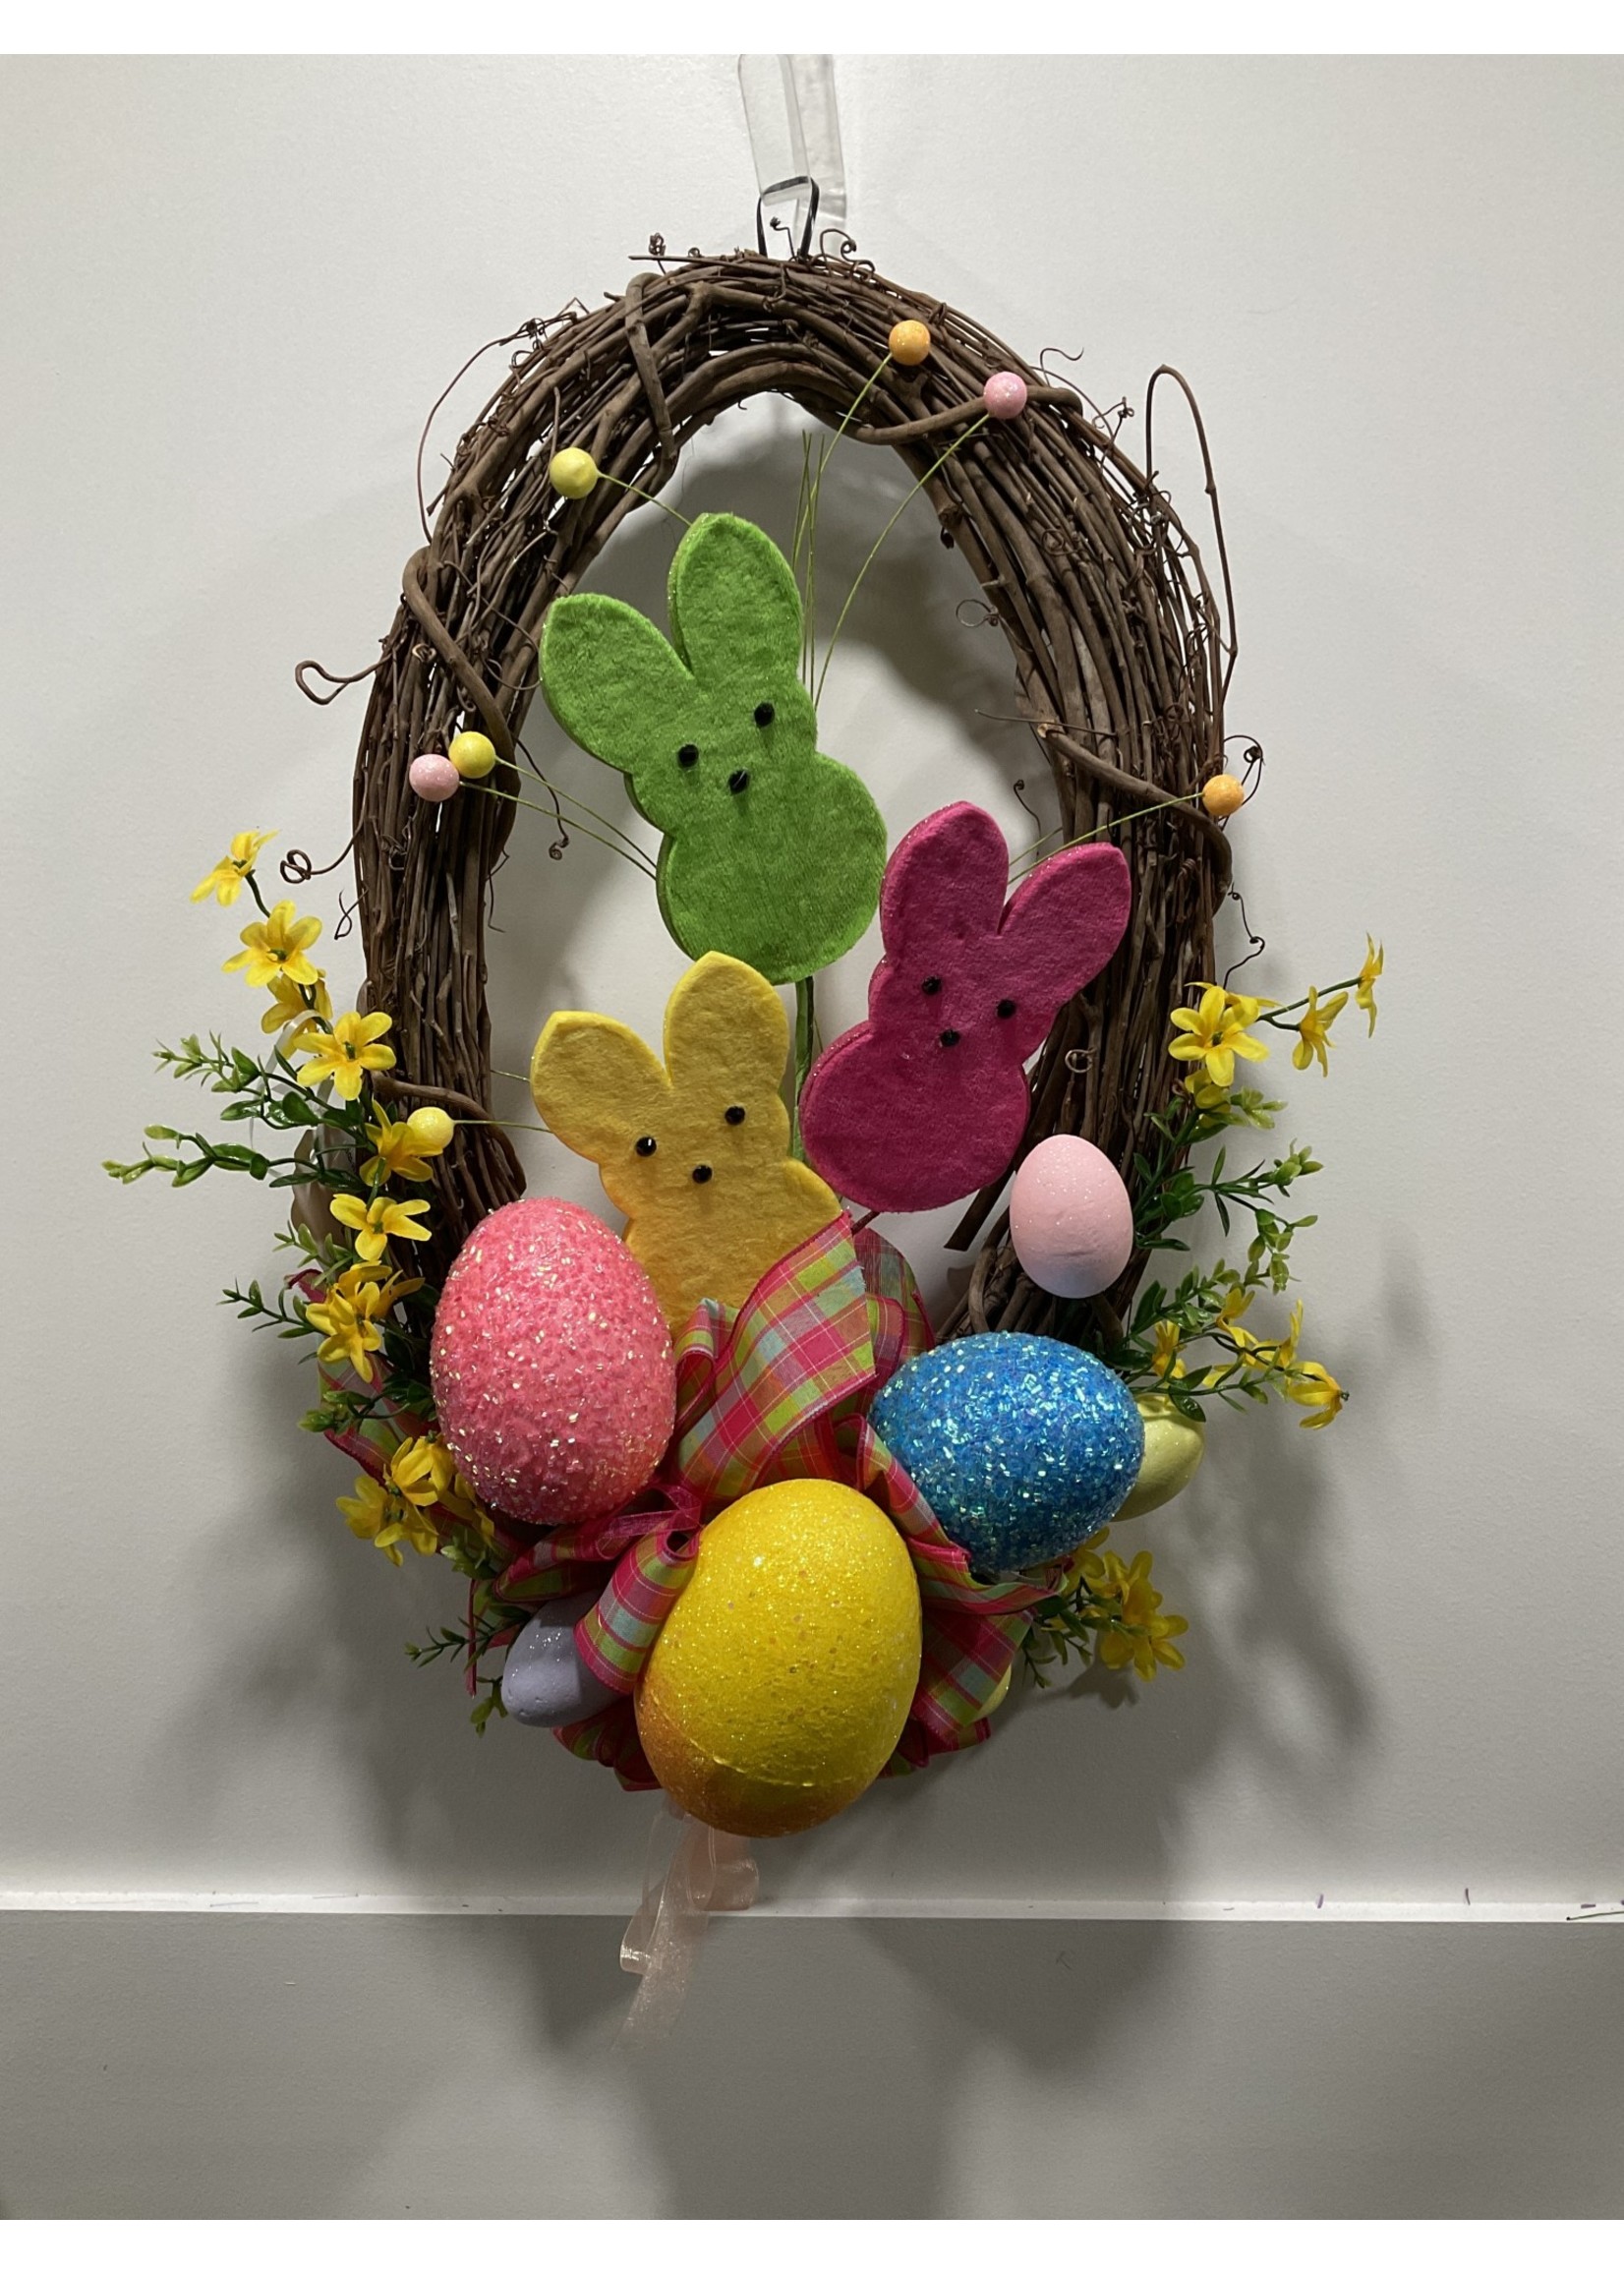 My New Favorite Thing 261 Wreath Grapevine Oval 24 in-3 Felt Bunnies and Easter Eggs w/Pink Plaid Ribbon